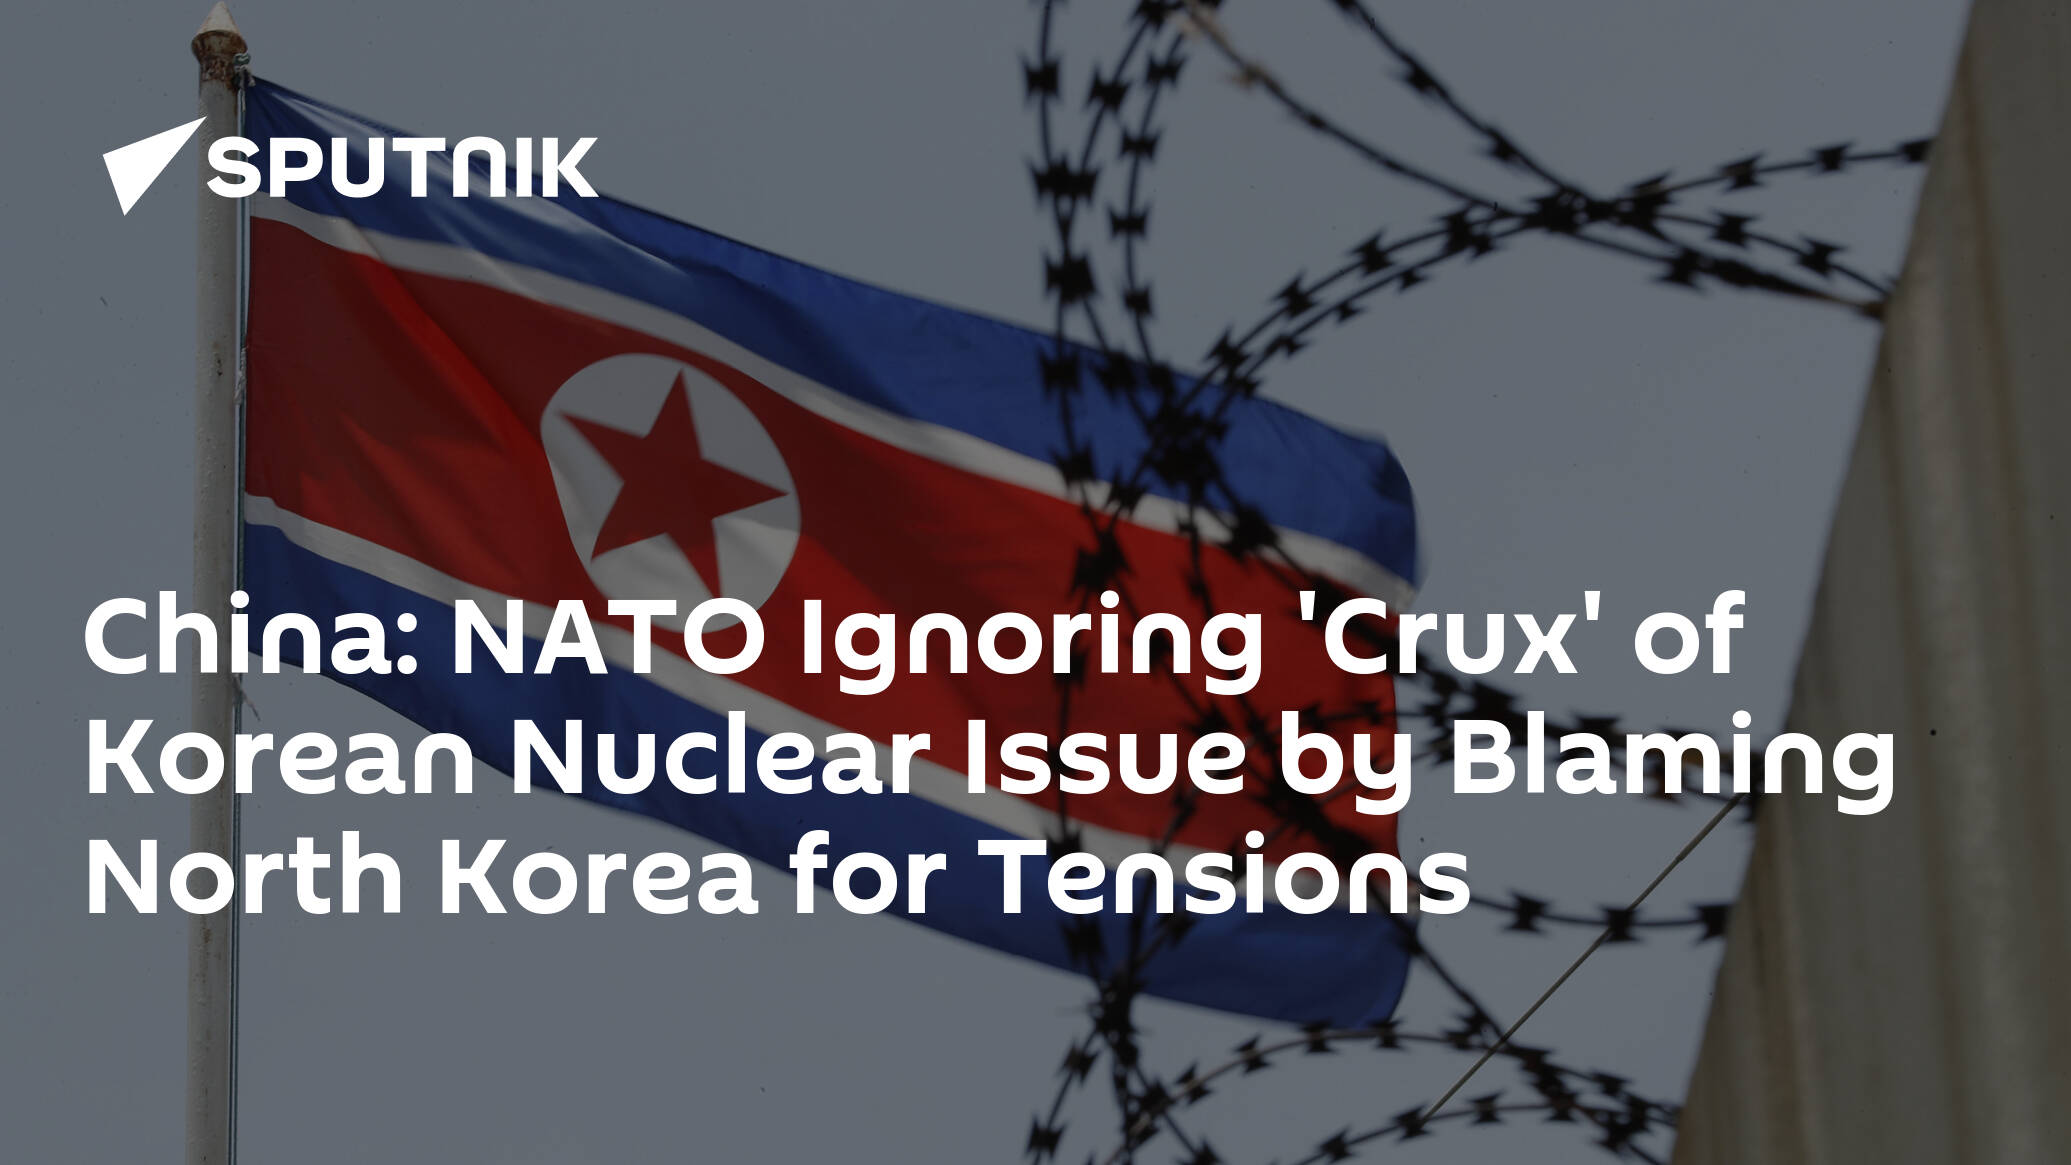 China: NATO Ignoring 'Crux' of Korean Nuclear Issue by Blaming North Korea for Tensions